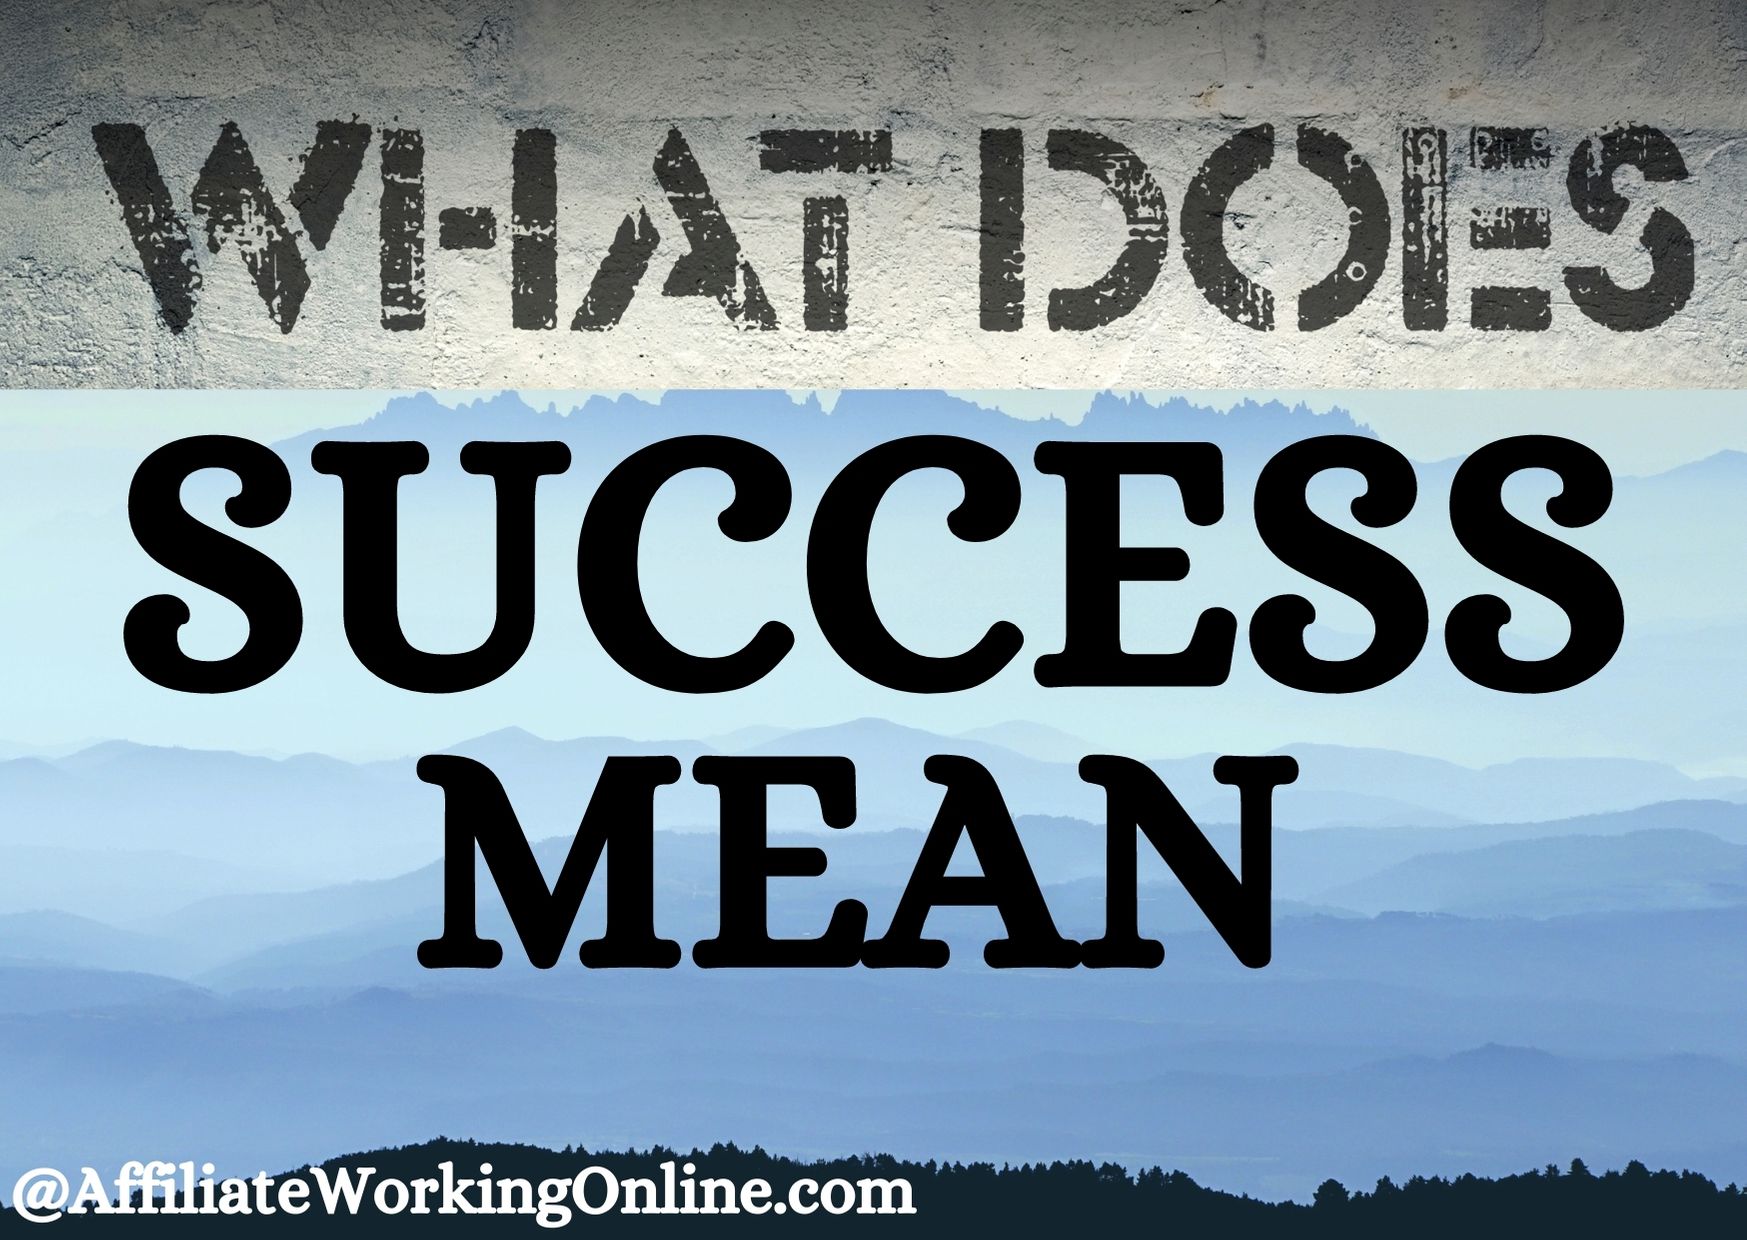 What does Success mean